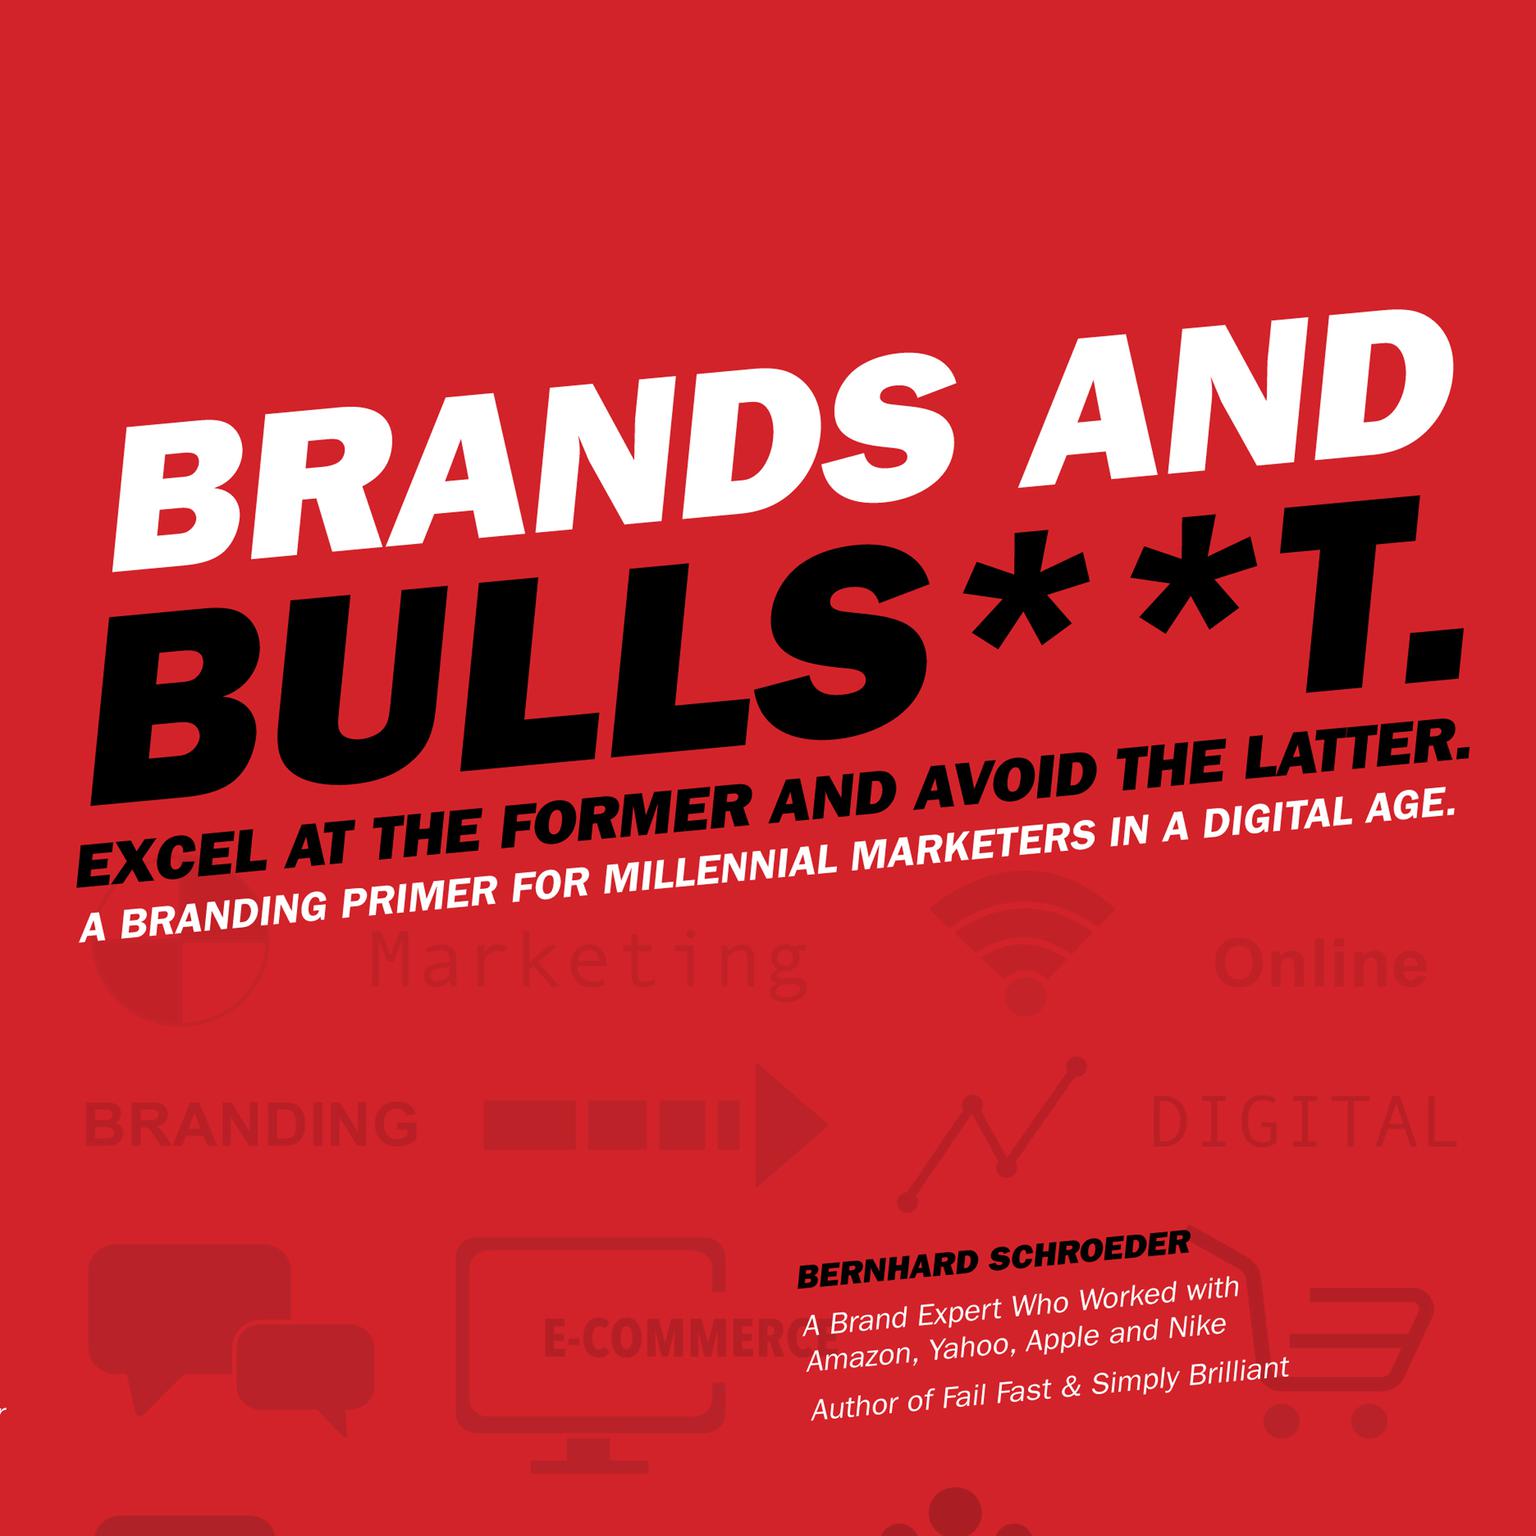 Brands and Bulls**t: Excel at the Former and Avoid the Latter. A Branding Primer for Millennial Marketers in a Digital Age. Audiobook, by Bernhard Schroeder